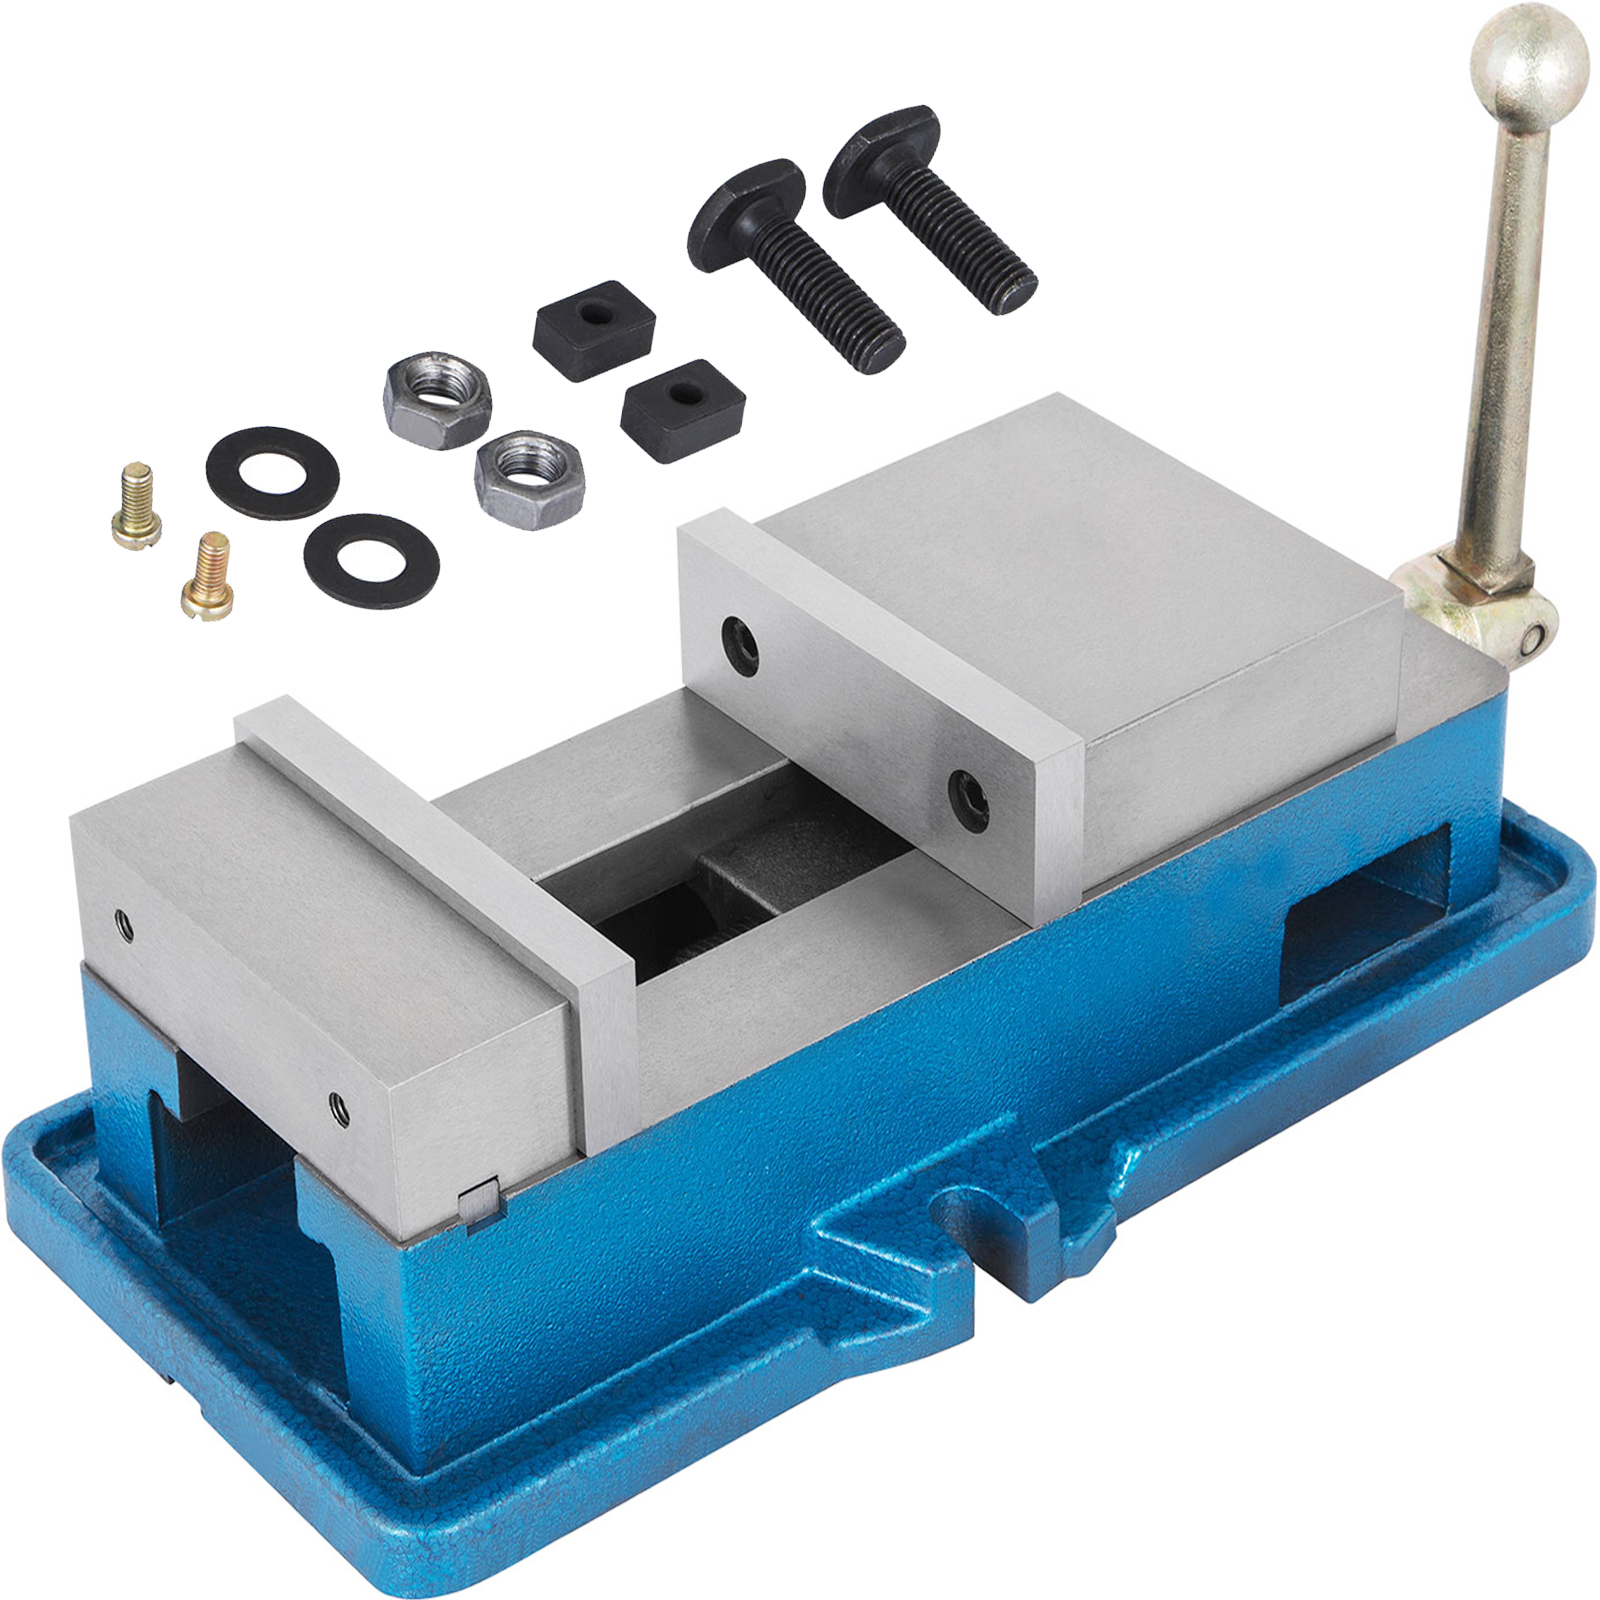 milling drilling vise,bench clamp vise,3 Inch